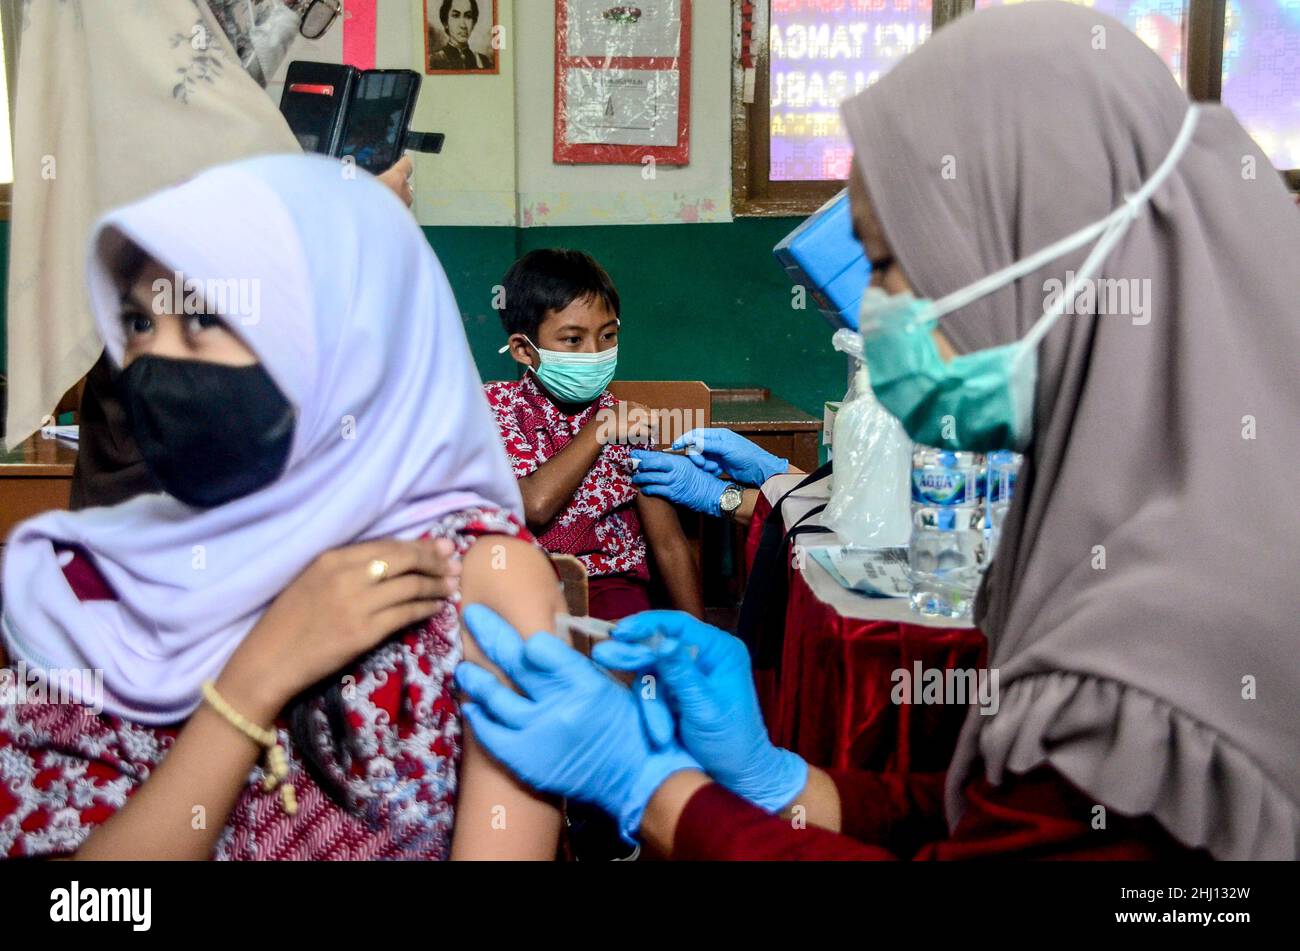 Bogor, Indonesia. 26th Jan, 2022. A health worker administers a dose of COVID-19 vaccine to a boy during vaccination for children aged 6 to 11 in Bogor, West Java, Indonesia, Jan. 26, 2022. Credit: Sandika Fadilah/Xinhua/Alamy Live News Stock Photo